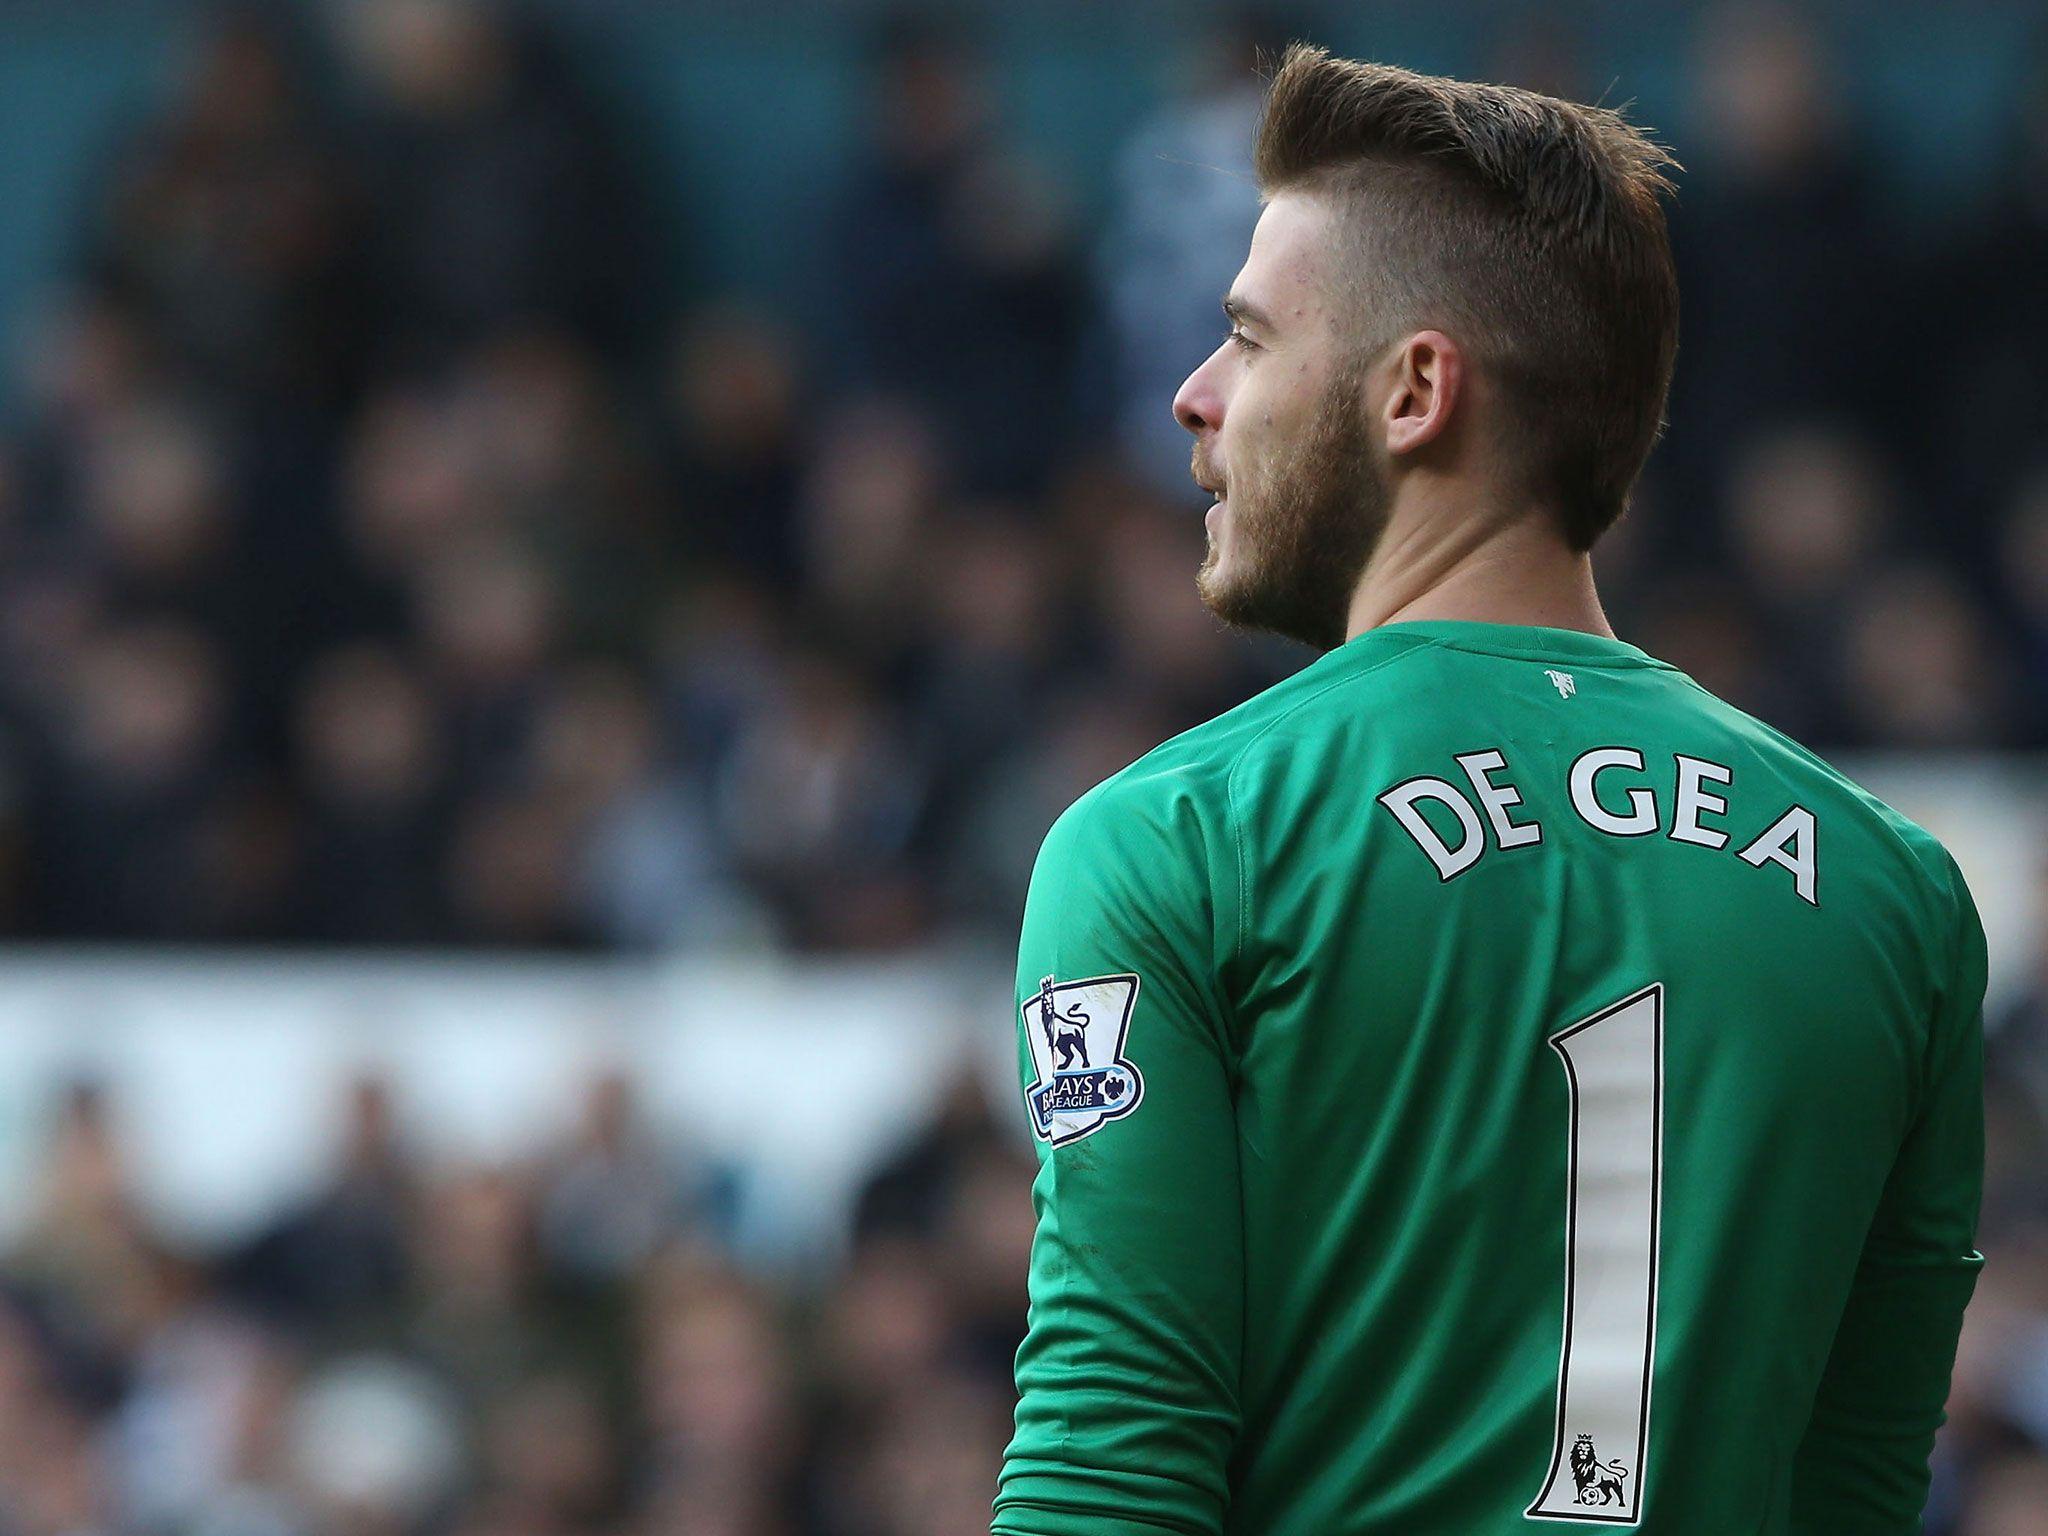 Manchester United transfer news and rumours: David De Gea new deal